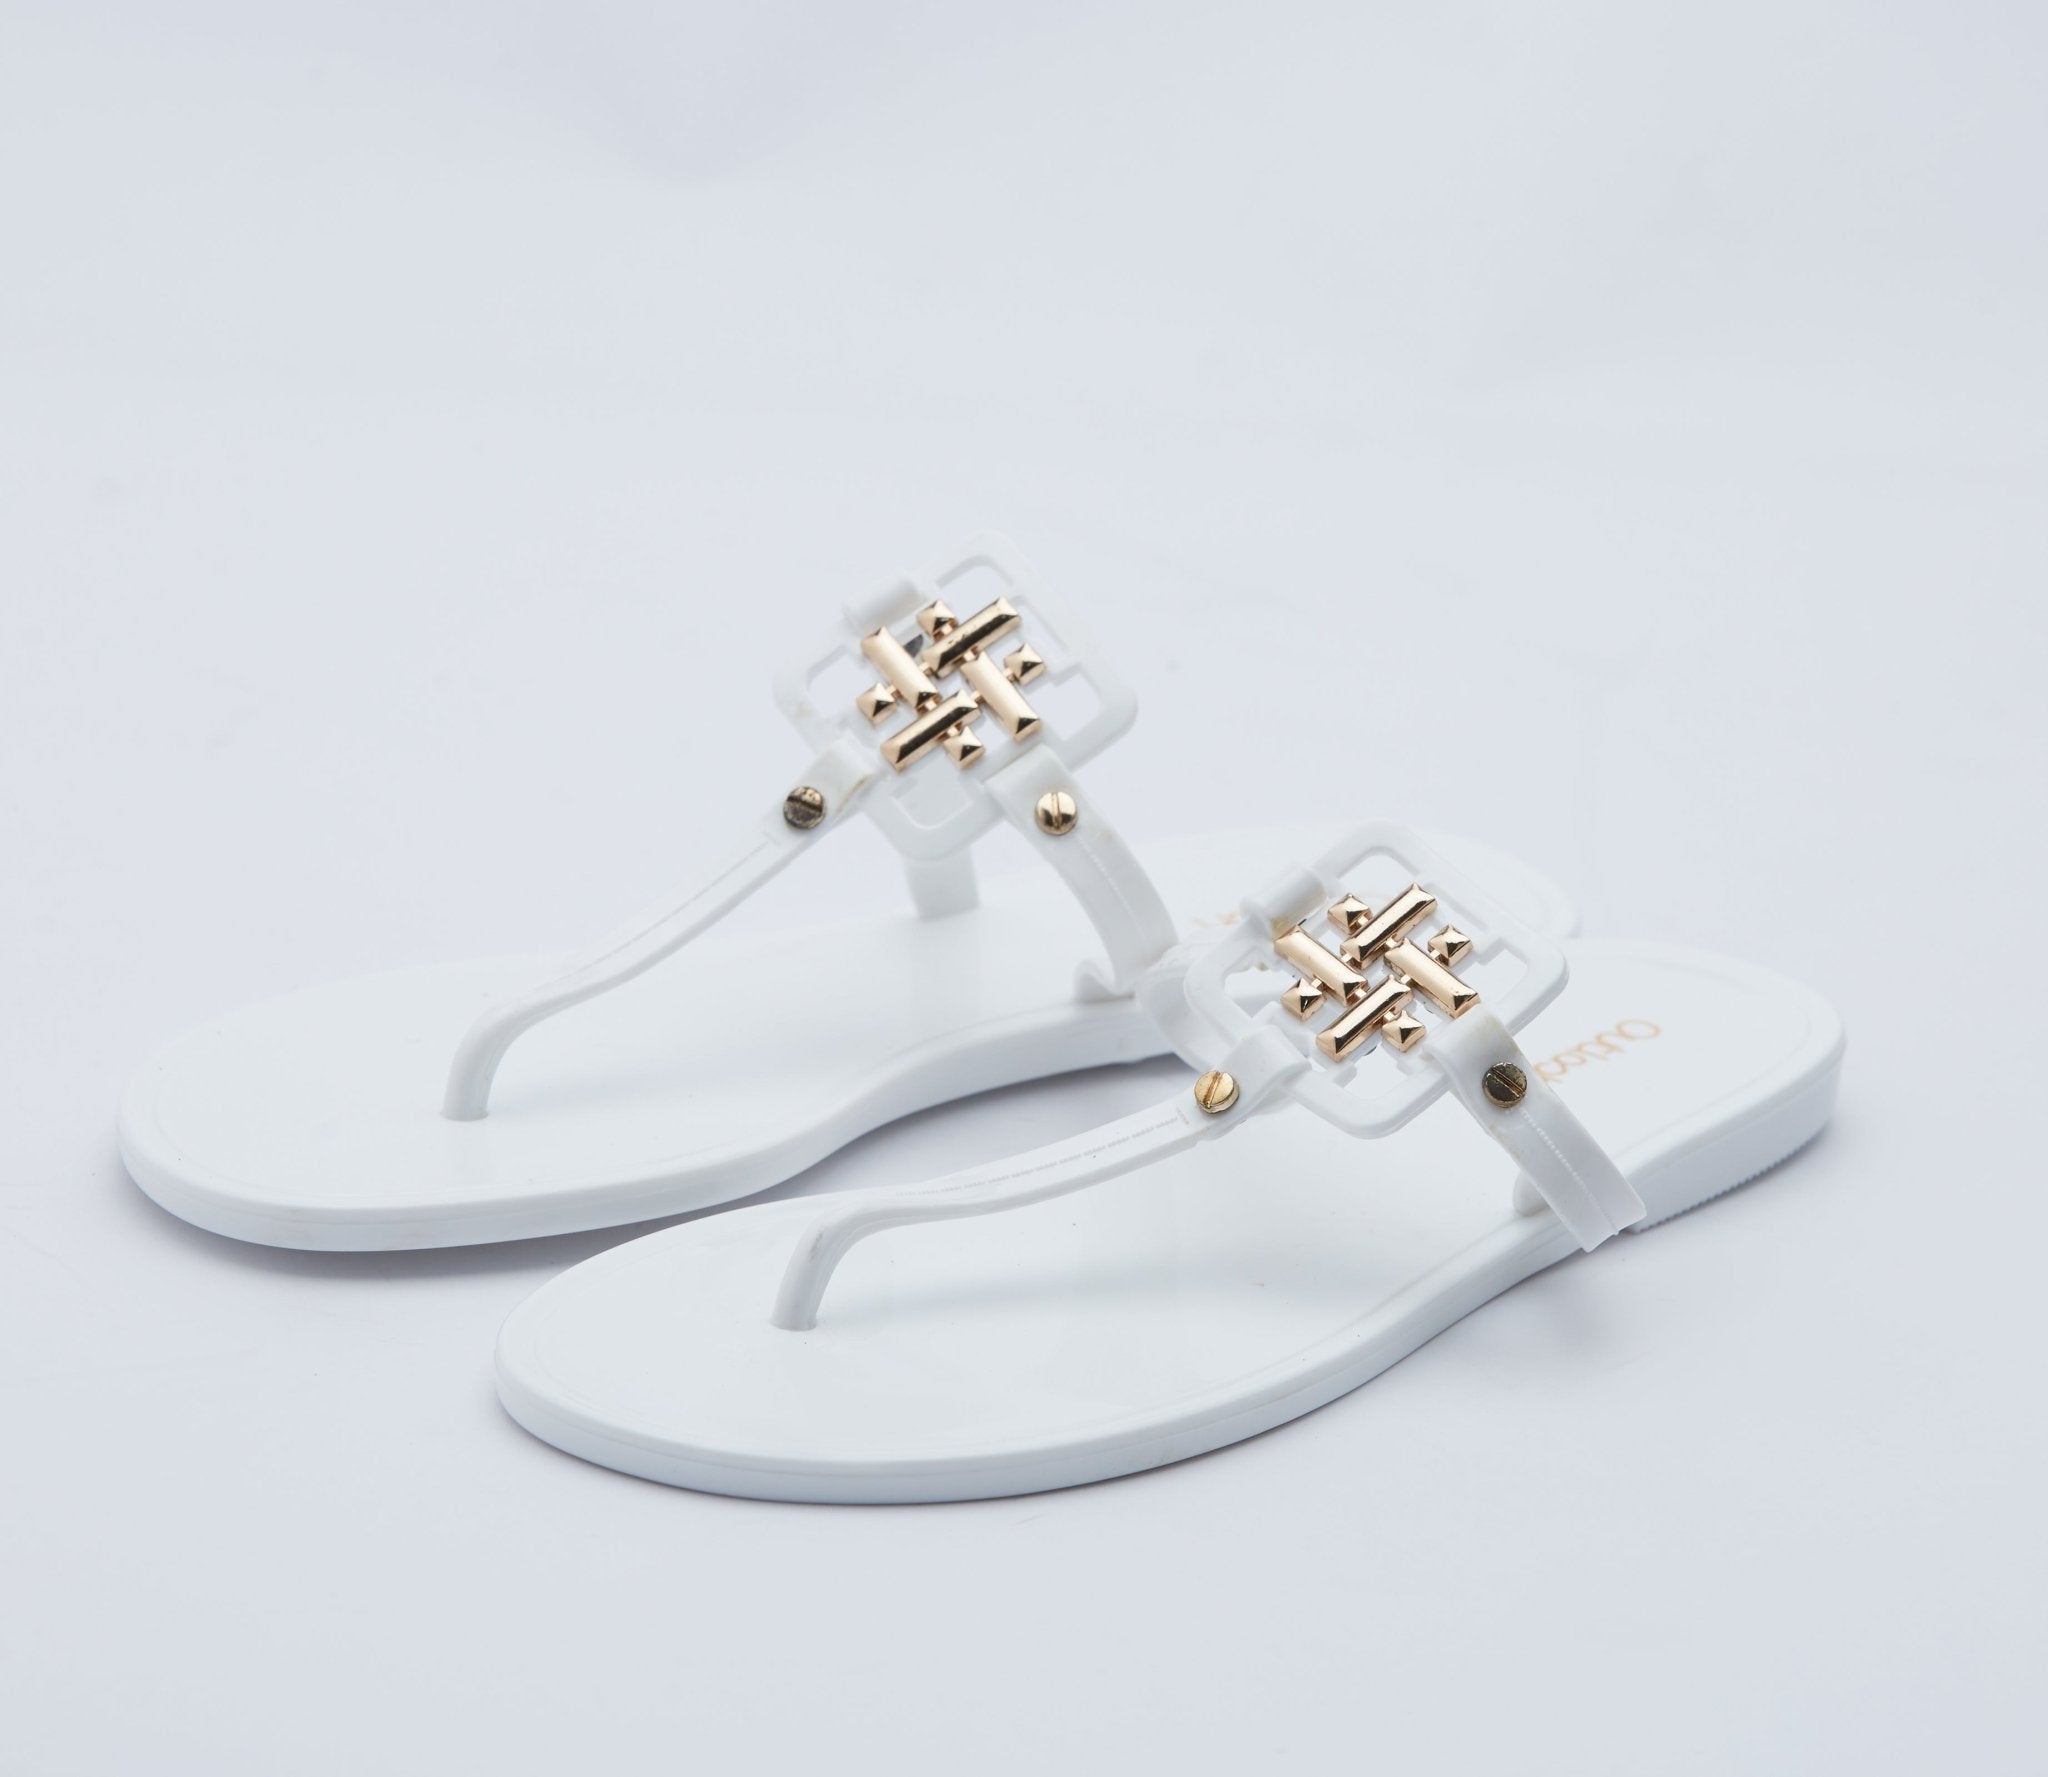 Outslay Jelly Slides in Ivory - Outlash brand